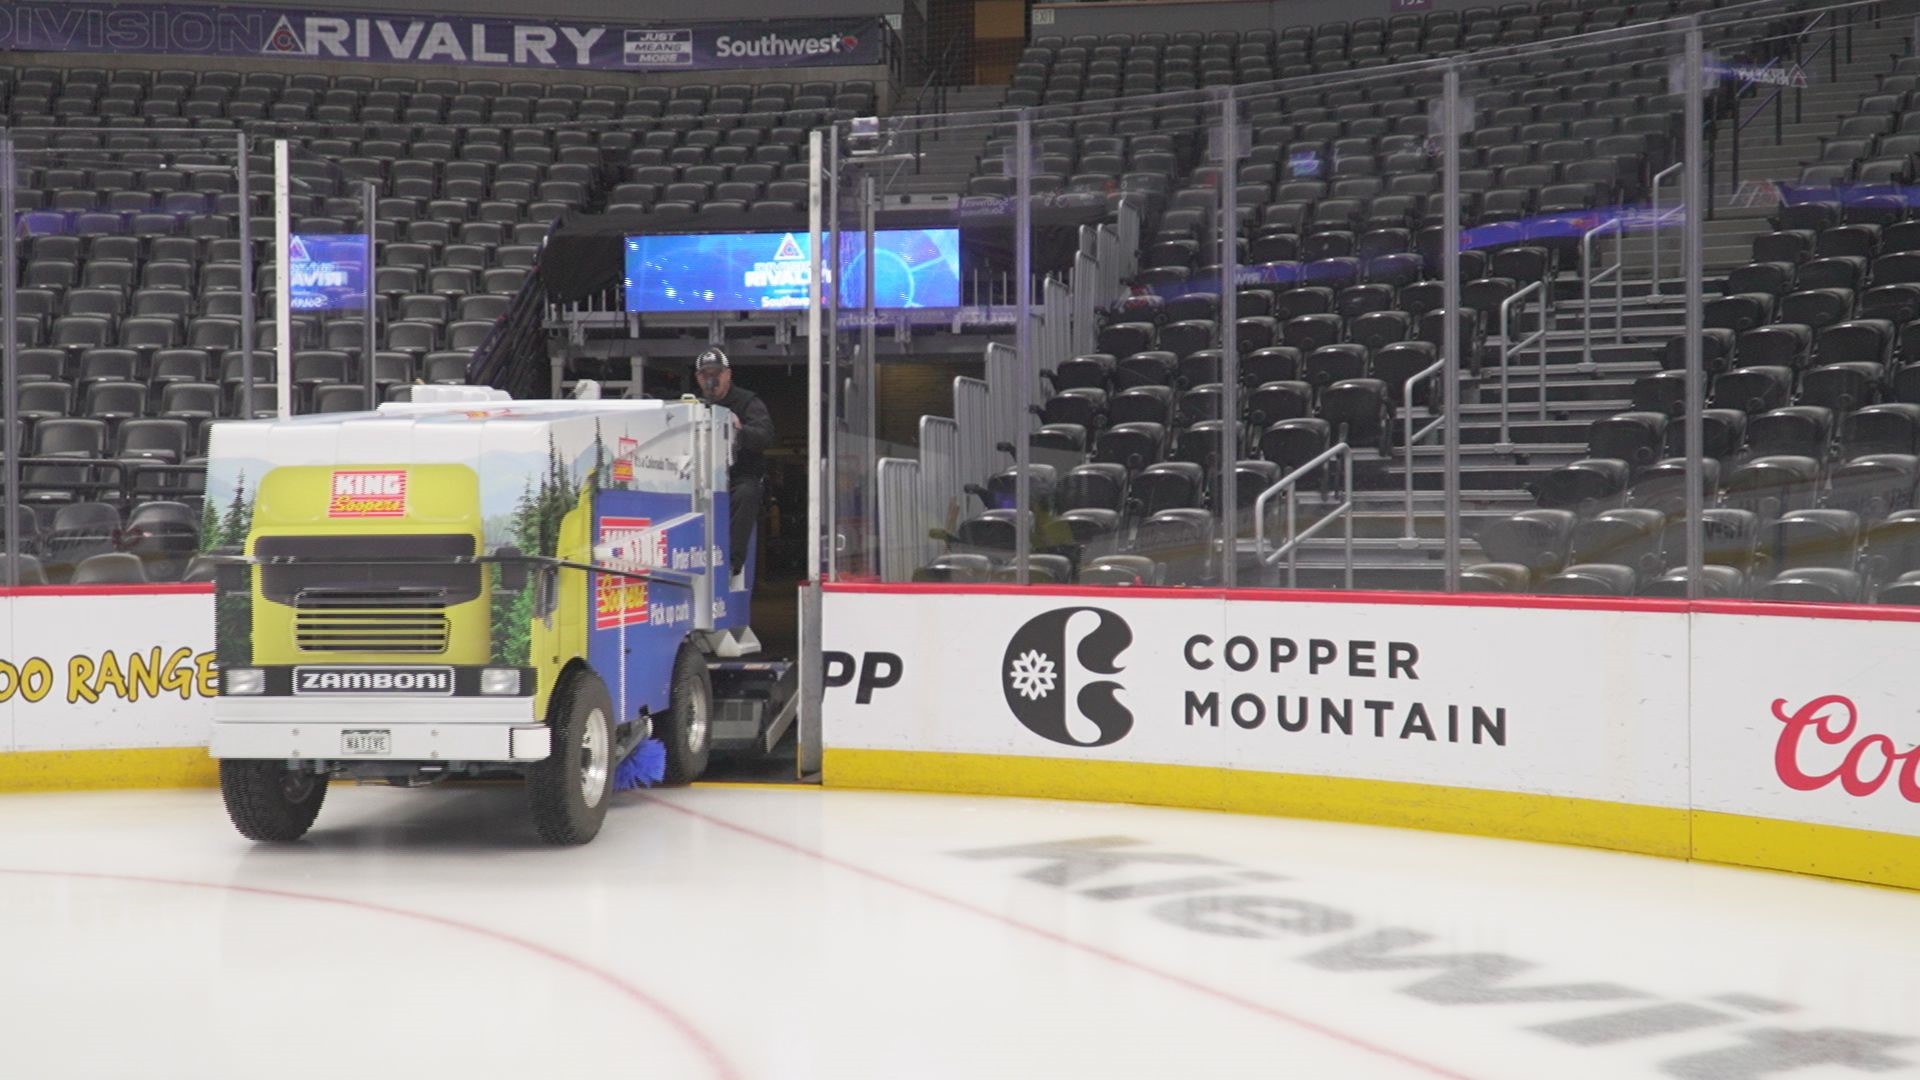 Tony Kreusch has spent over two decades creating and maintaining the ice at Ball Arena as the Avs' head ice technician.